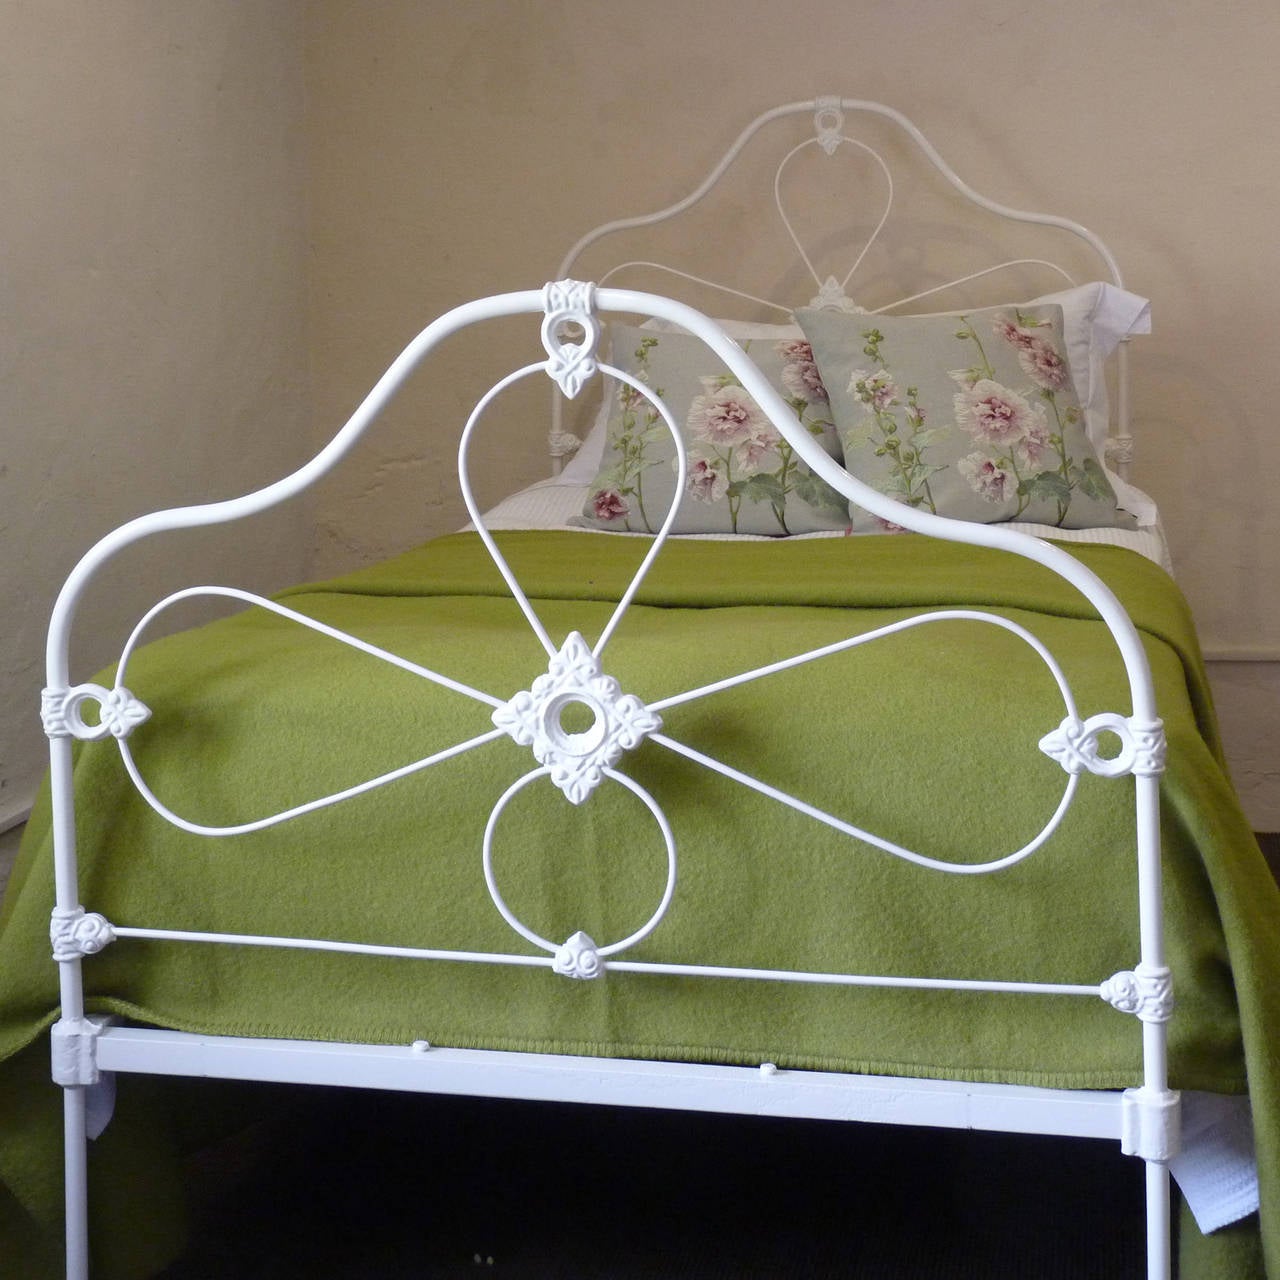 Pretty Mid-Victorian cast iron bed, powder-coated white with dainty decoration.

This mattress for this bed is a large single, 3 ft 6 in wide by 6 ft 3 in long.

The price is for the bed frame alone. The base, mattress, bedding and linen are extra.